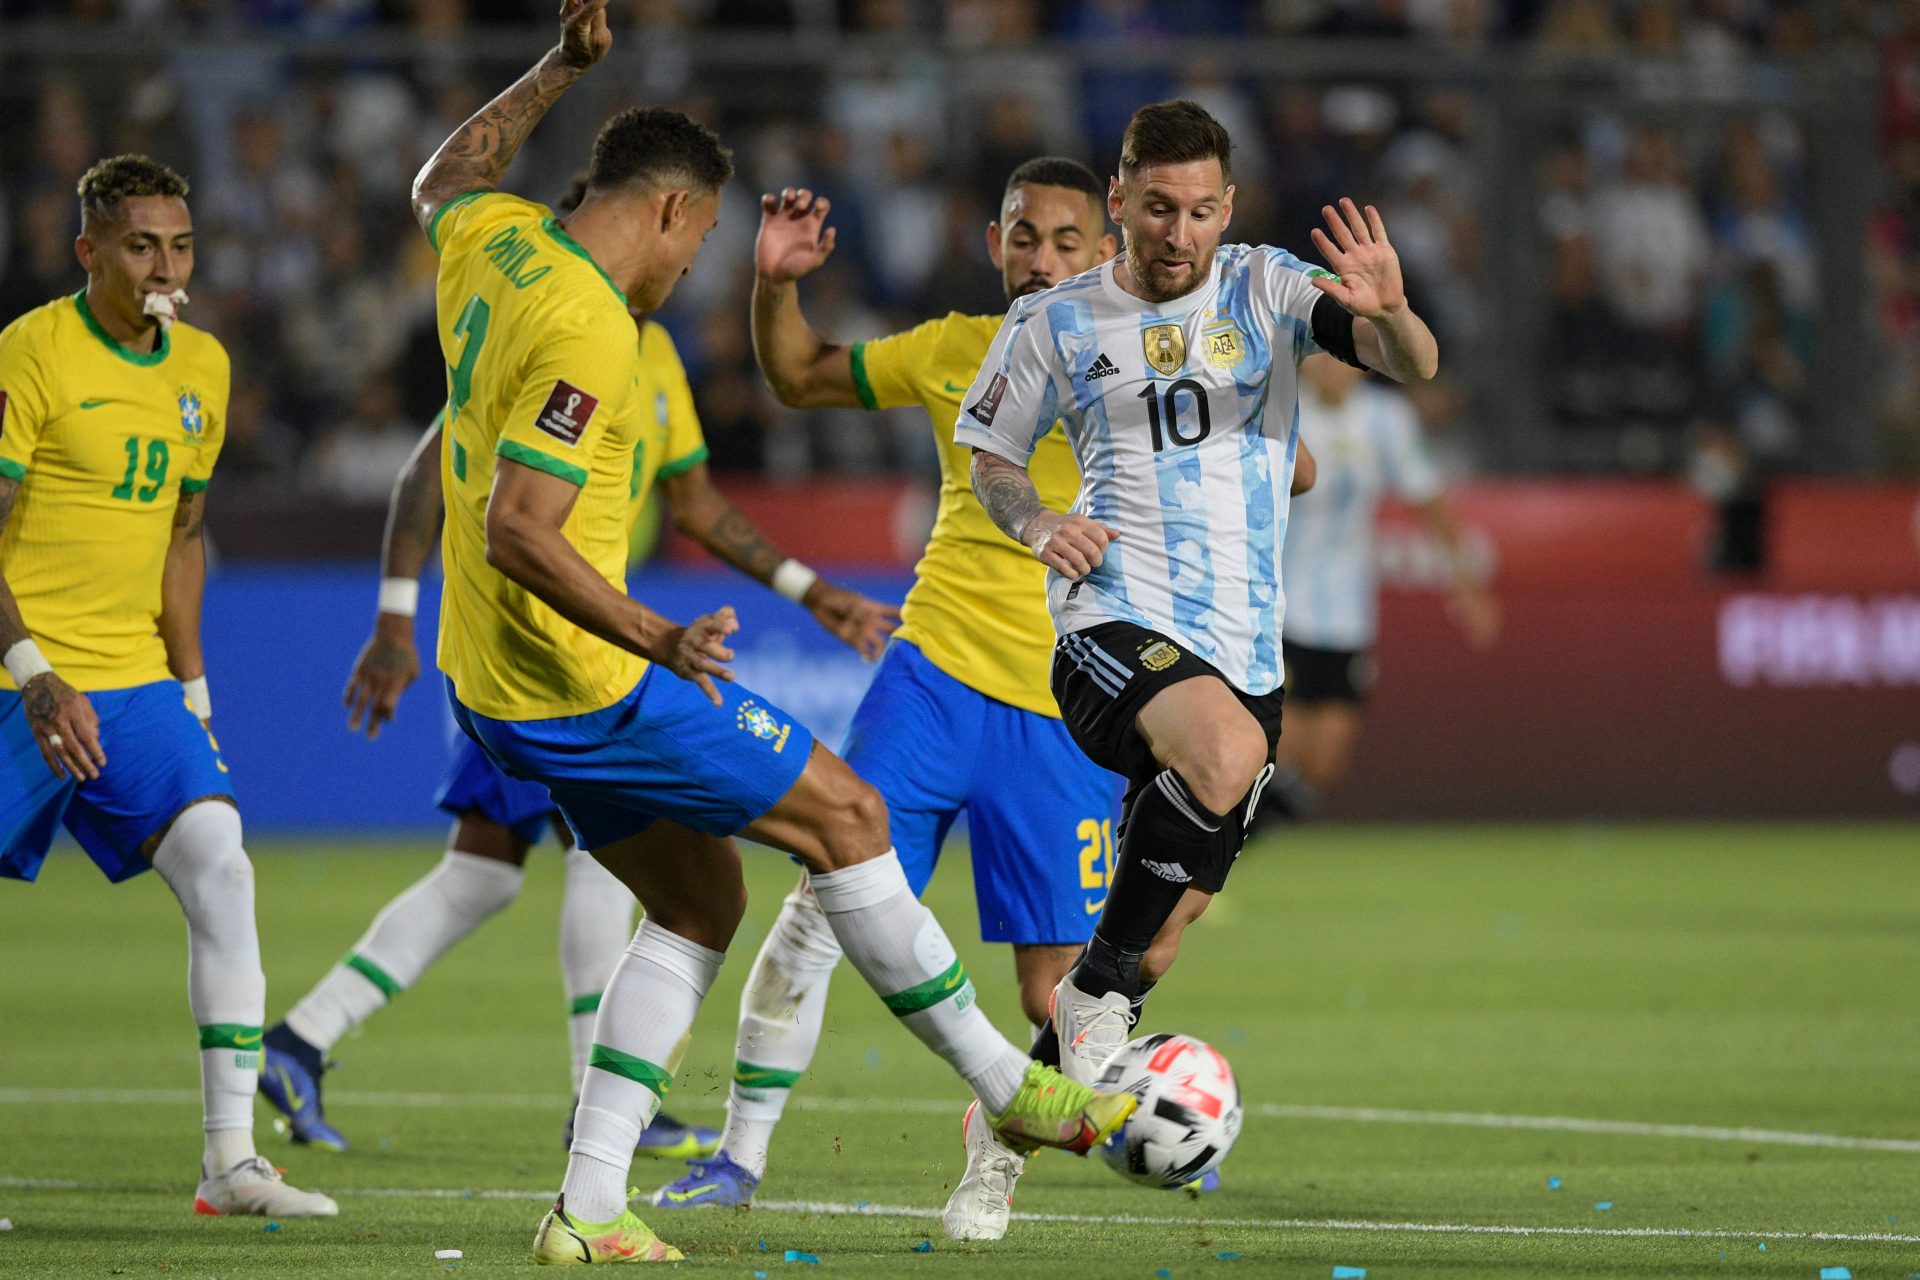 Argentina or Brazil: Who has the best team?